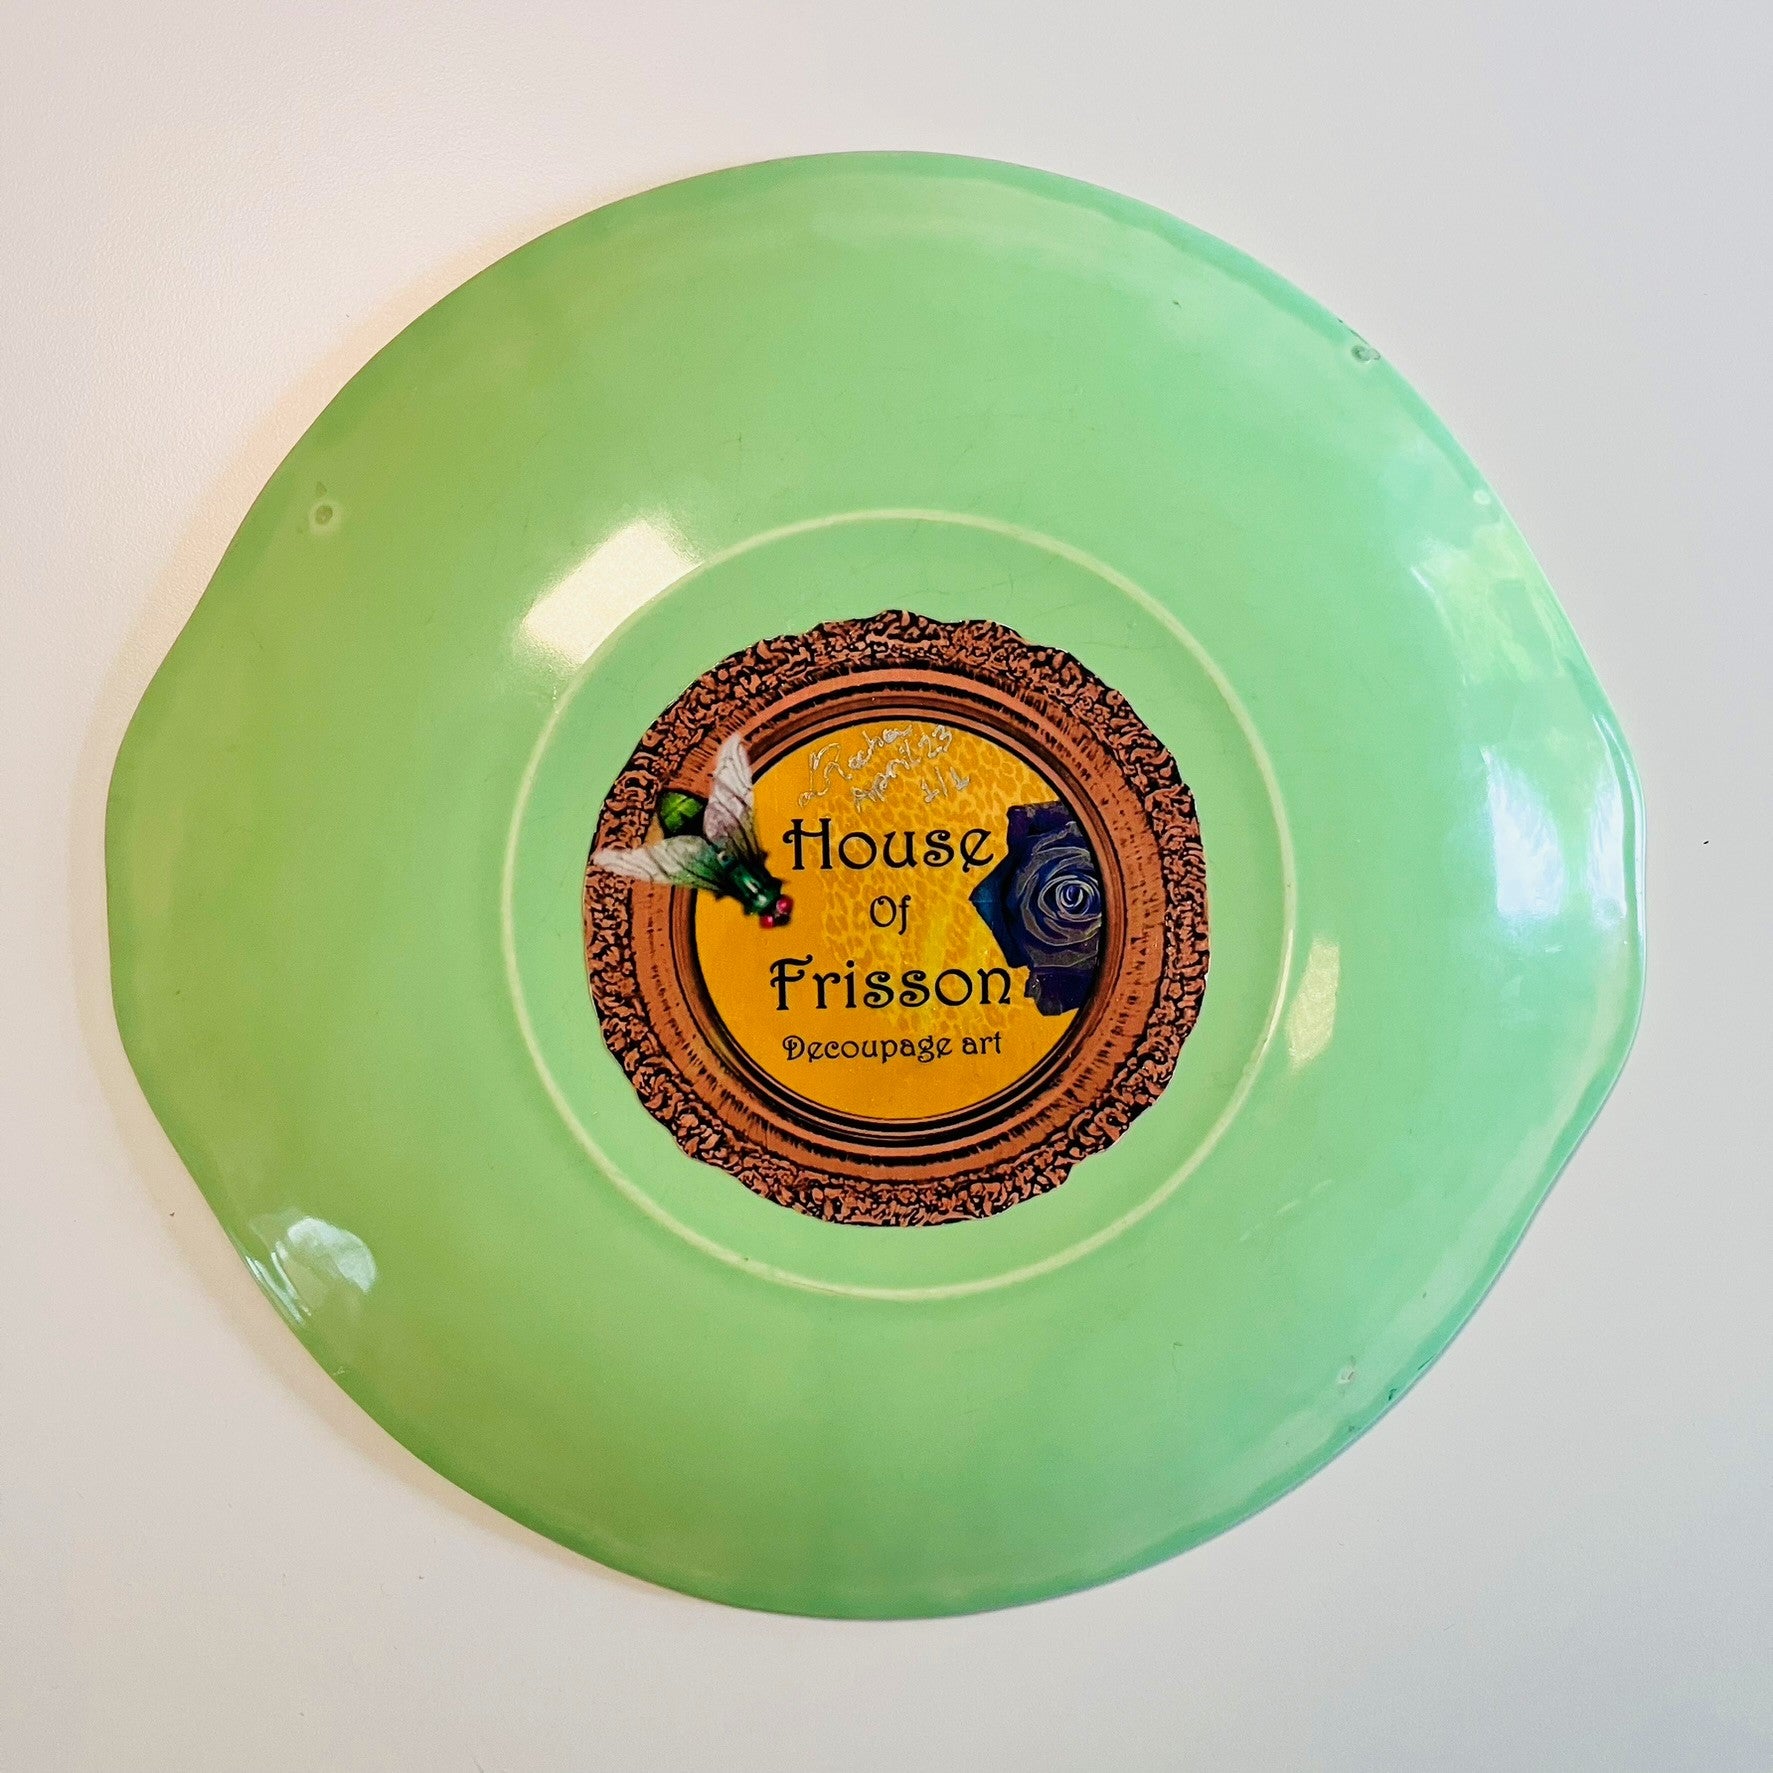 "Cheeky" Wall Plate by House of Frisson, featuring a collage with letters coming out of flowers forming the word "cheeky", and a lizard, on a green background. Showing back of the plate.